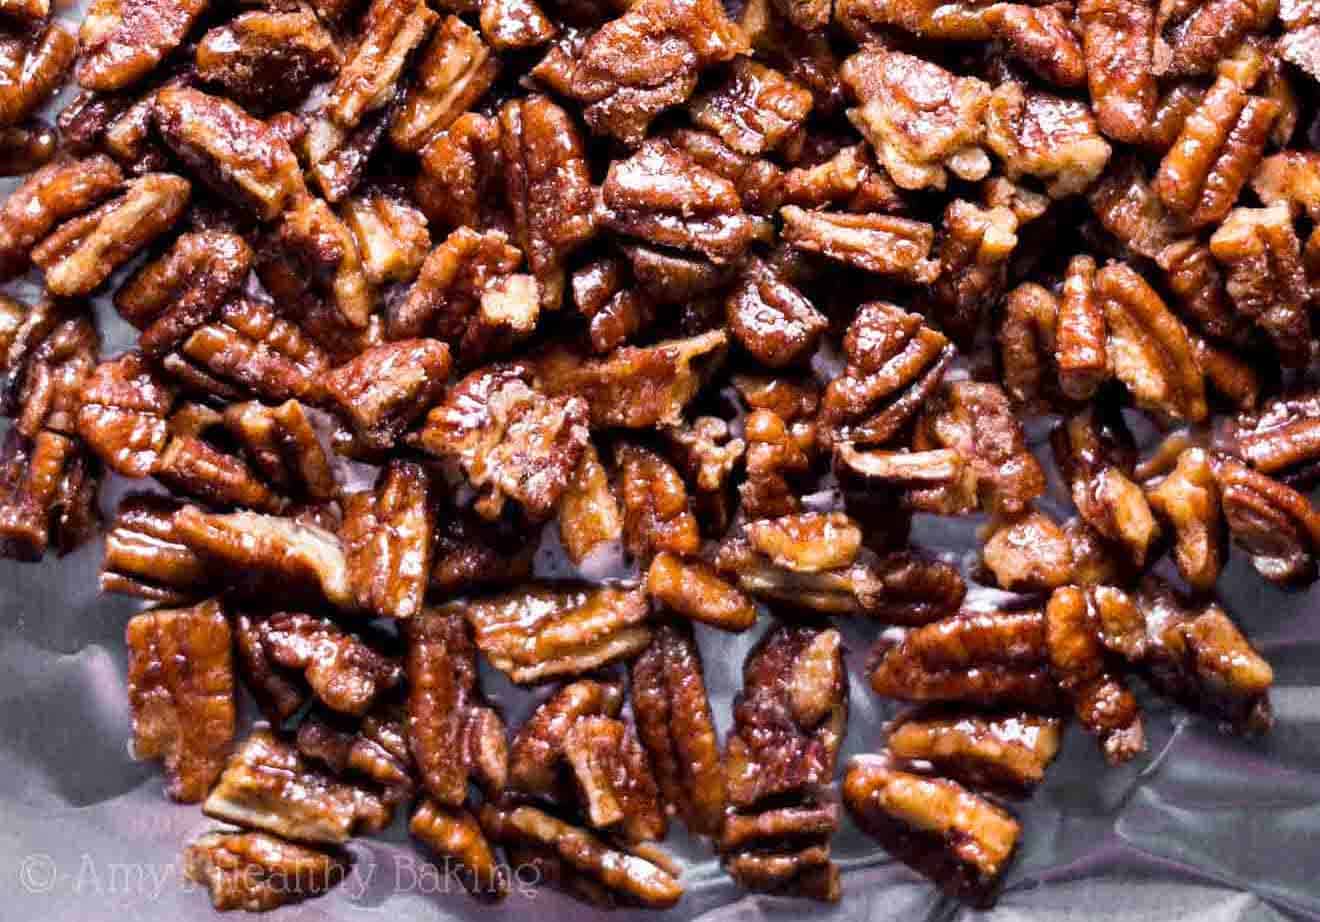 Yummy 5 minute candied pecans recipe